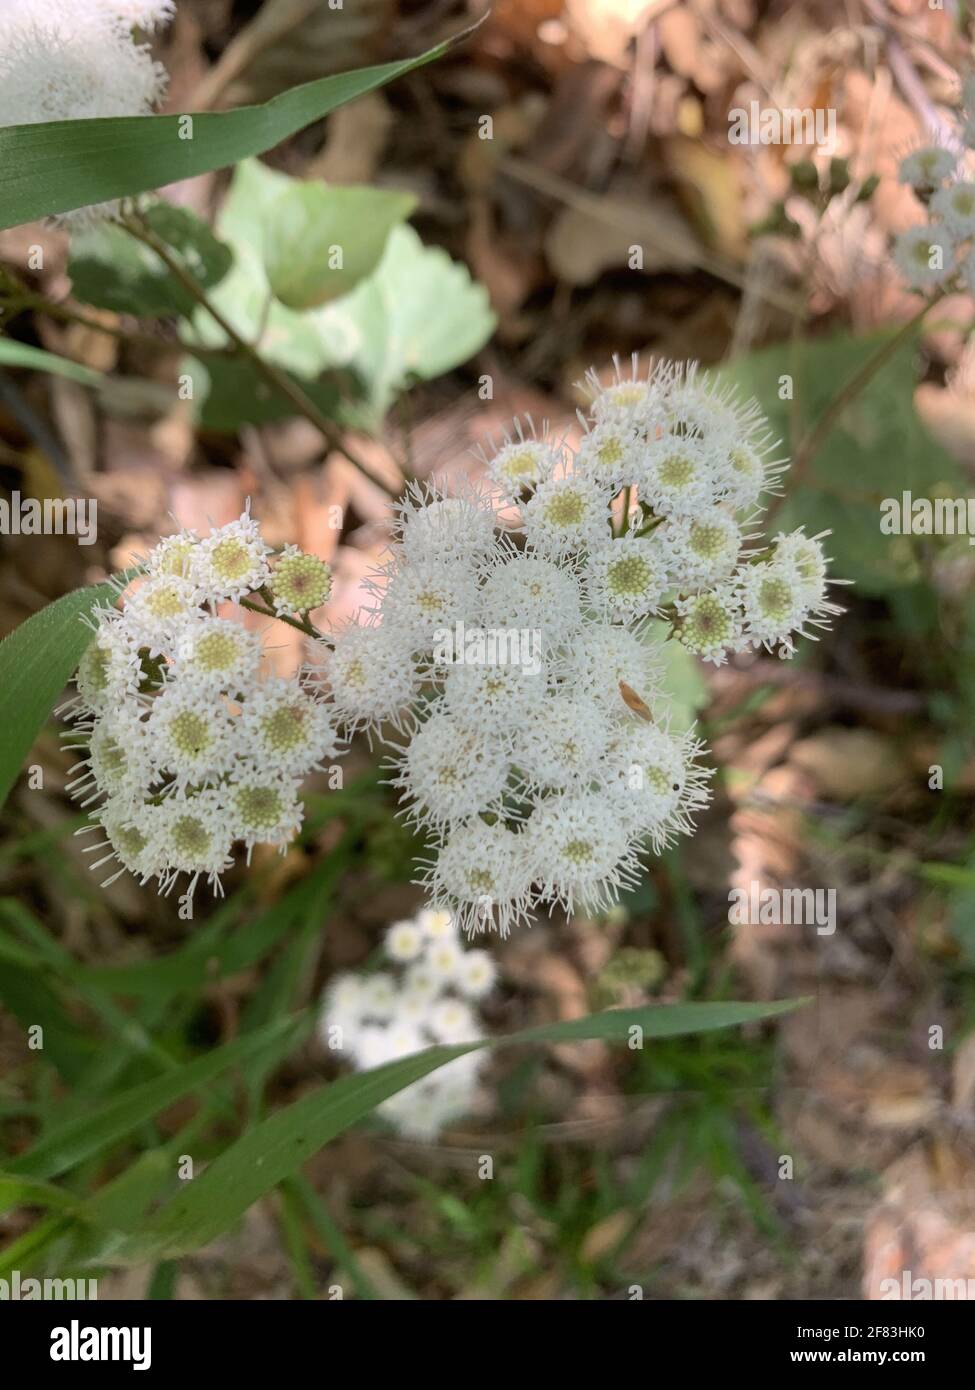 A closeup of Ageratina adenophora or Crofton weed plant with white flowers Stock Photo